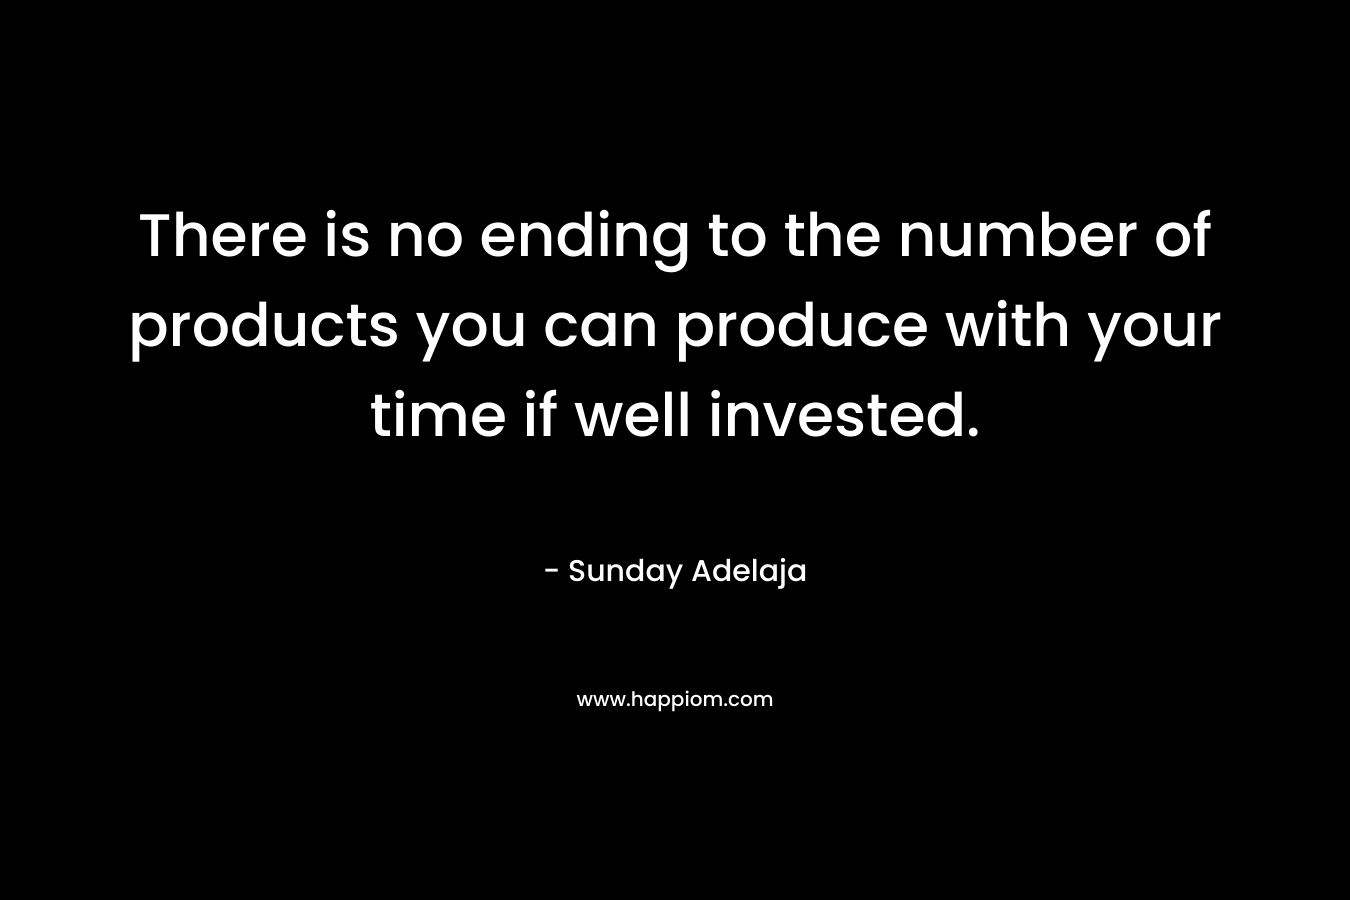 There is no ending to the number of products you can produce with your time if well invested.